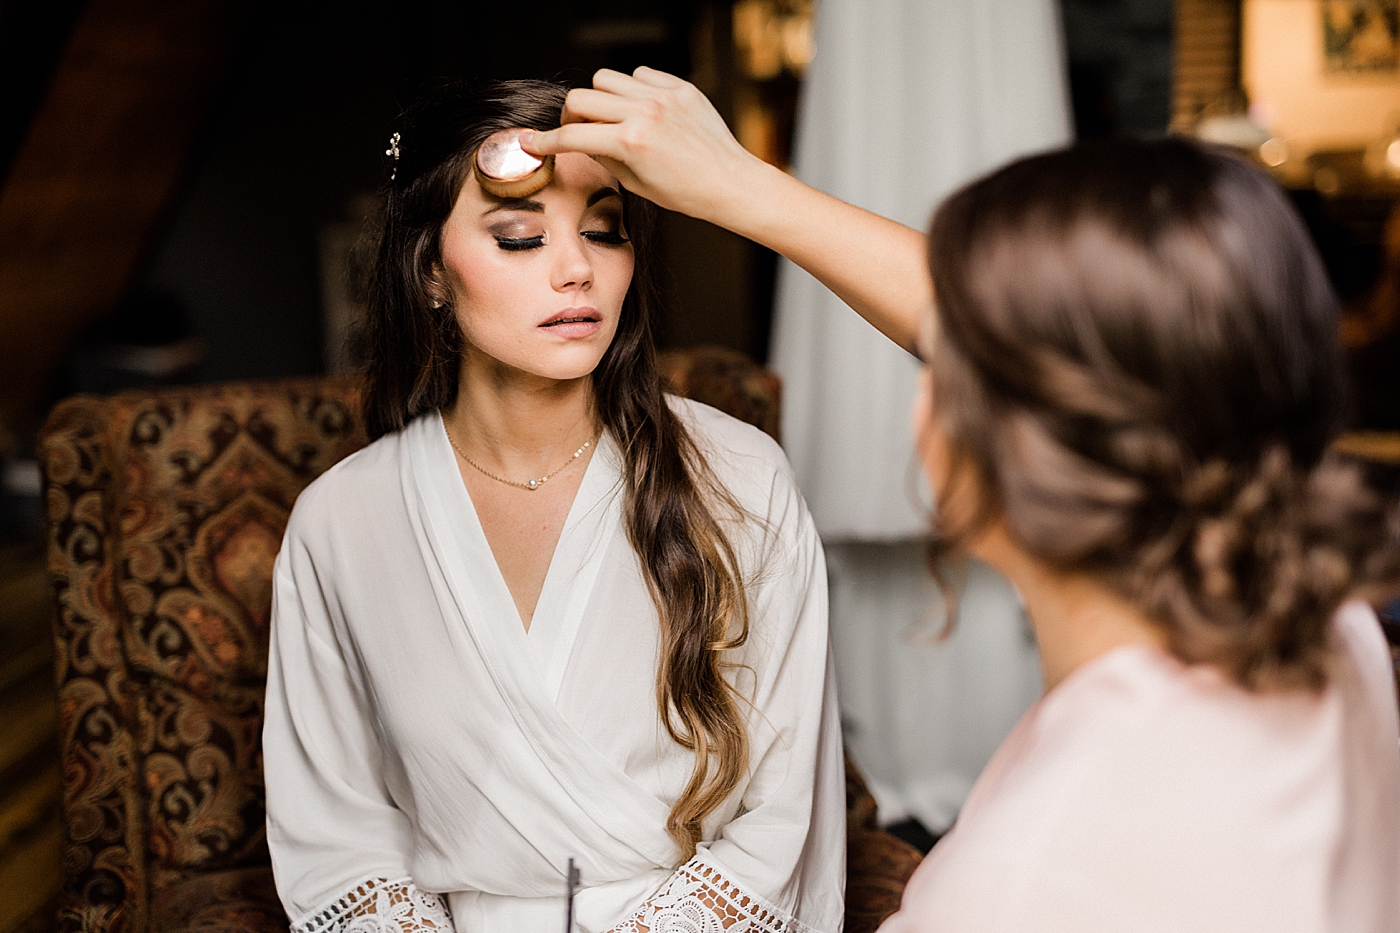 Bride getting ready for elopement at a cabin in Ashford, WA | Megan Montalvo Photography